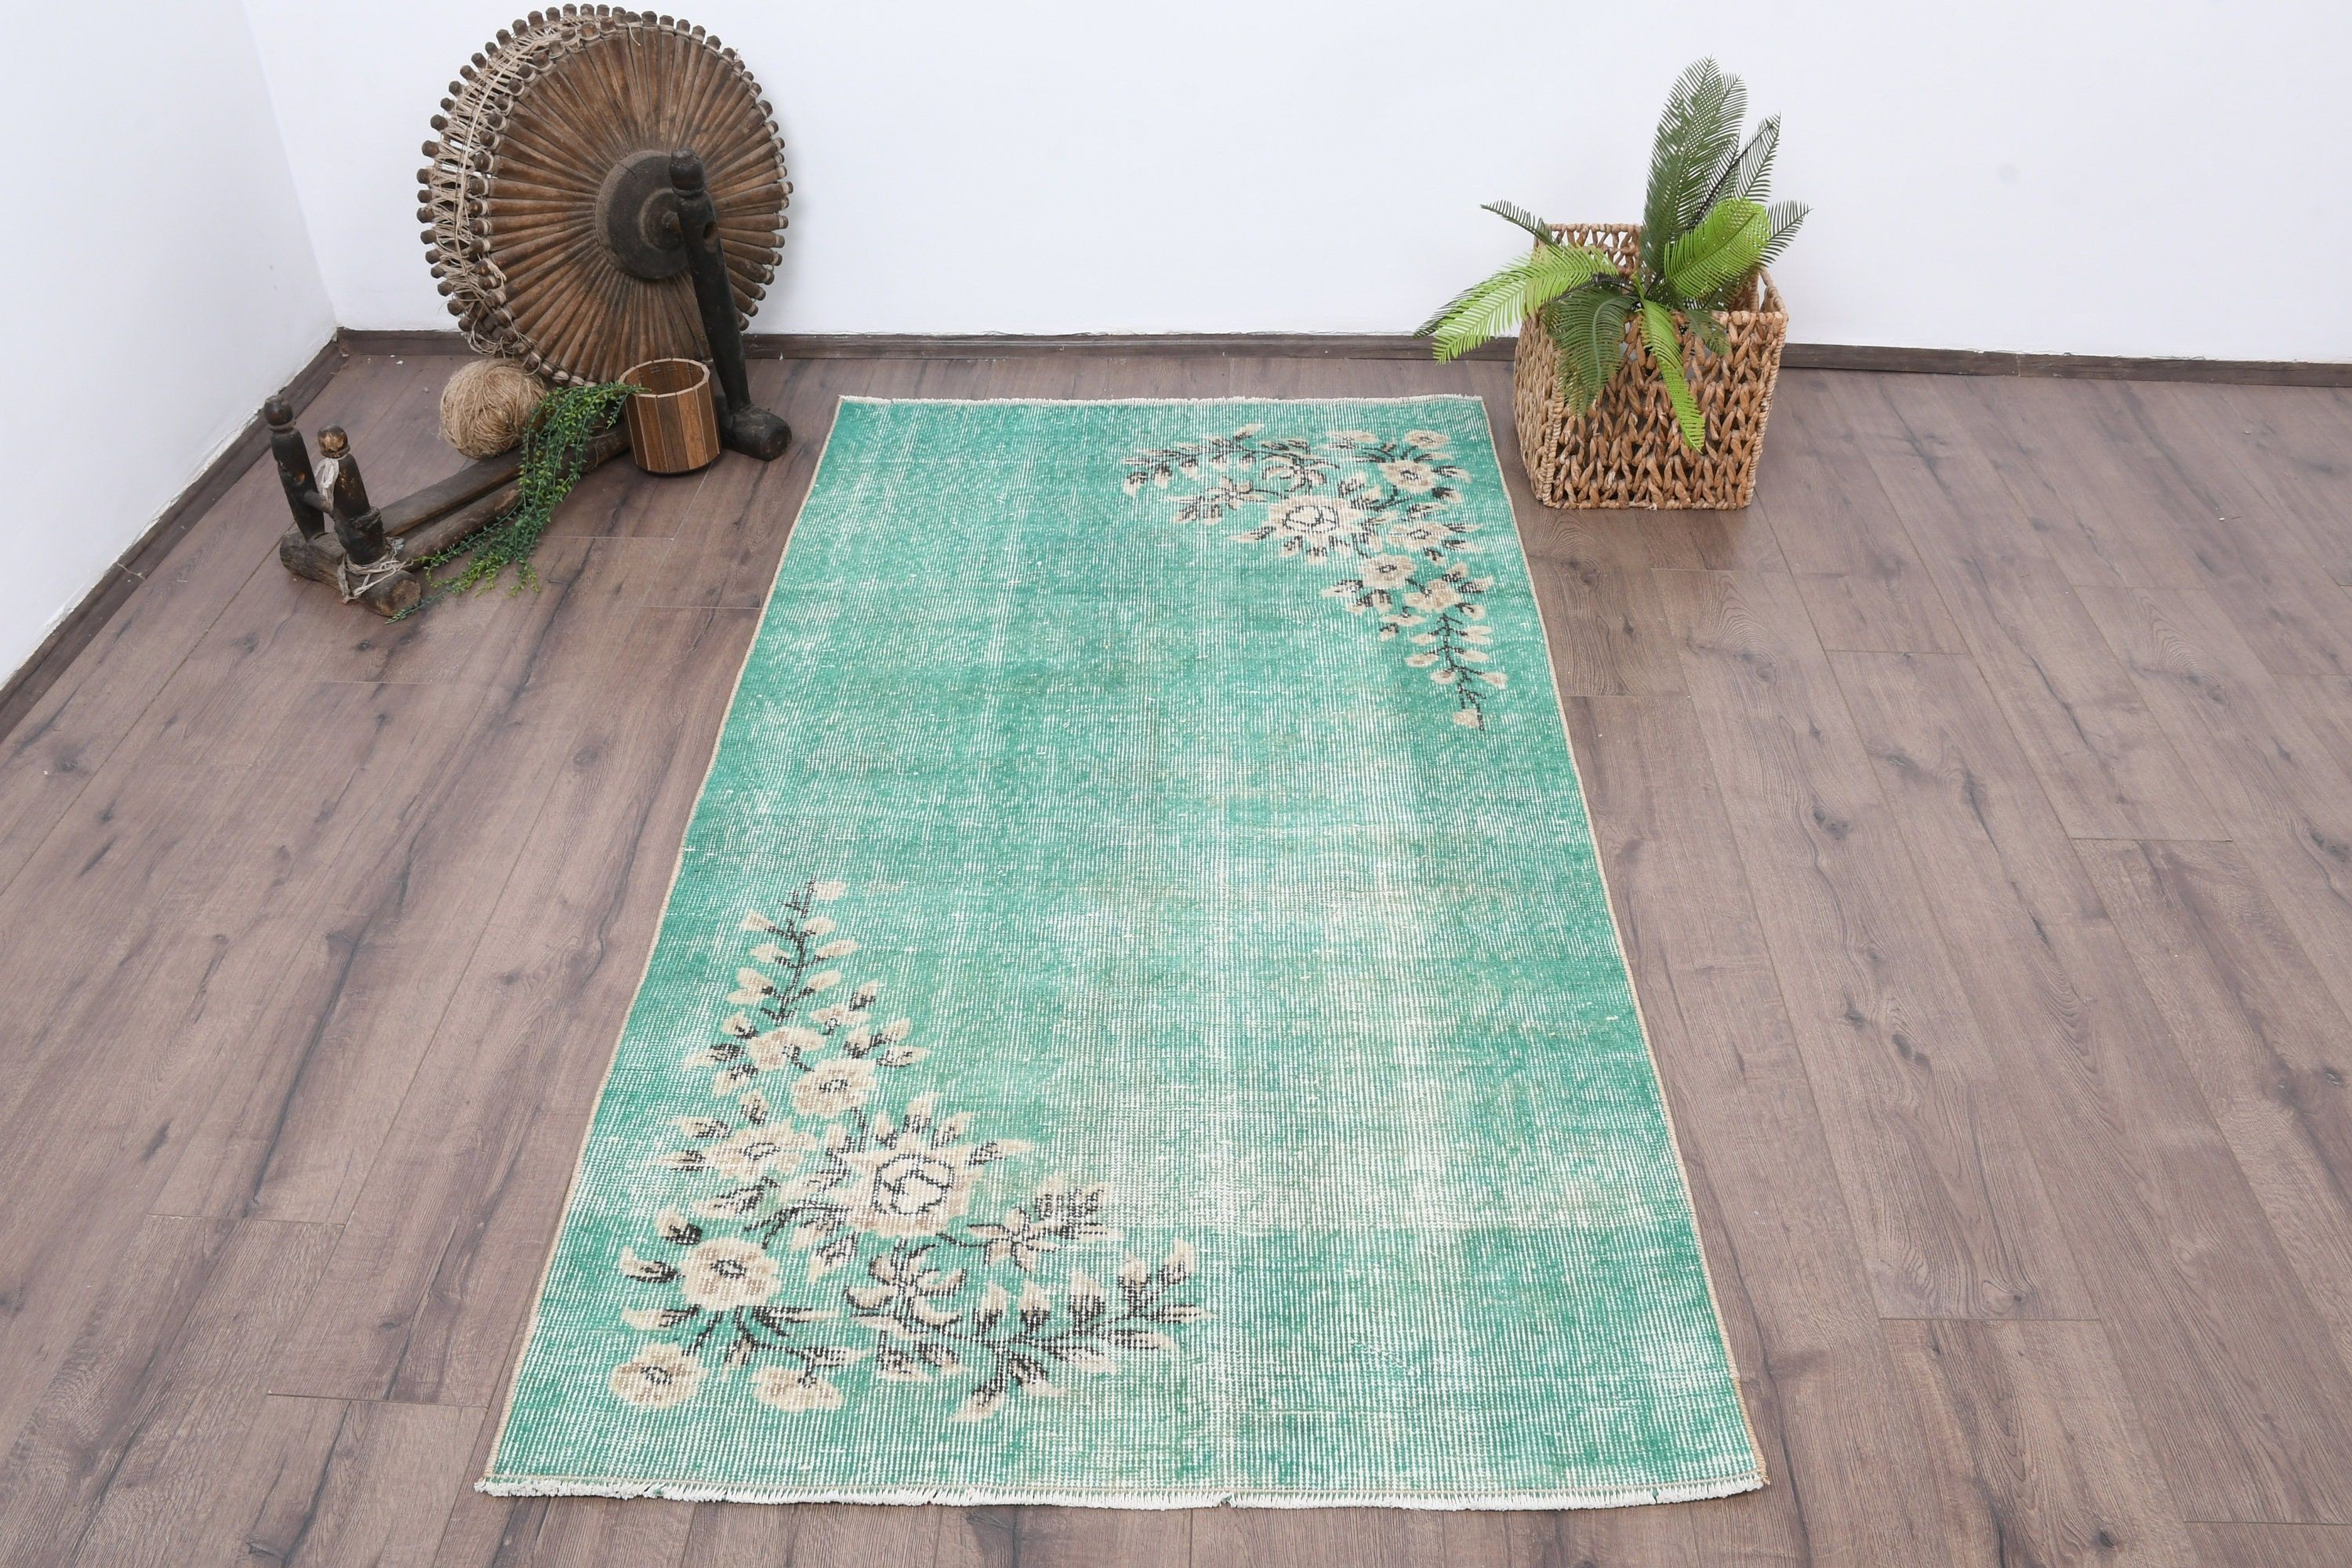 Vintage Rug, Entry Rugs, Green Oushak Rugs, Turkish Rugs, Eclectic Rug, 3.3x6 ft Accent Rug, Bedroom Rugs, Rugs for Kitchen, Oushak Rugs